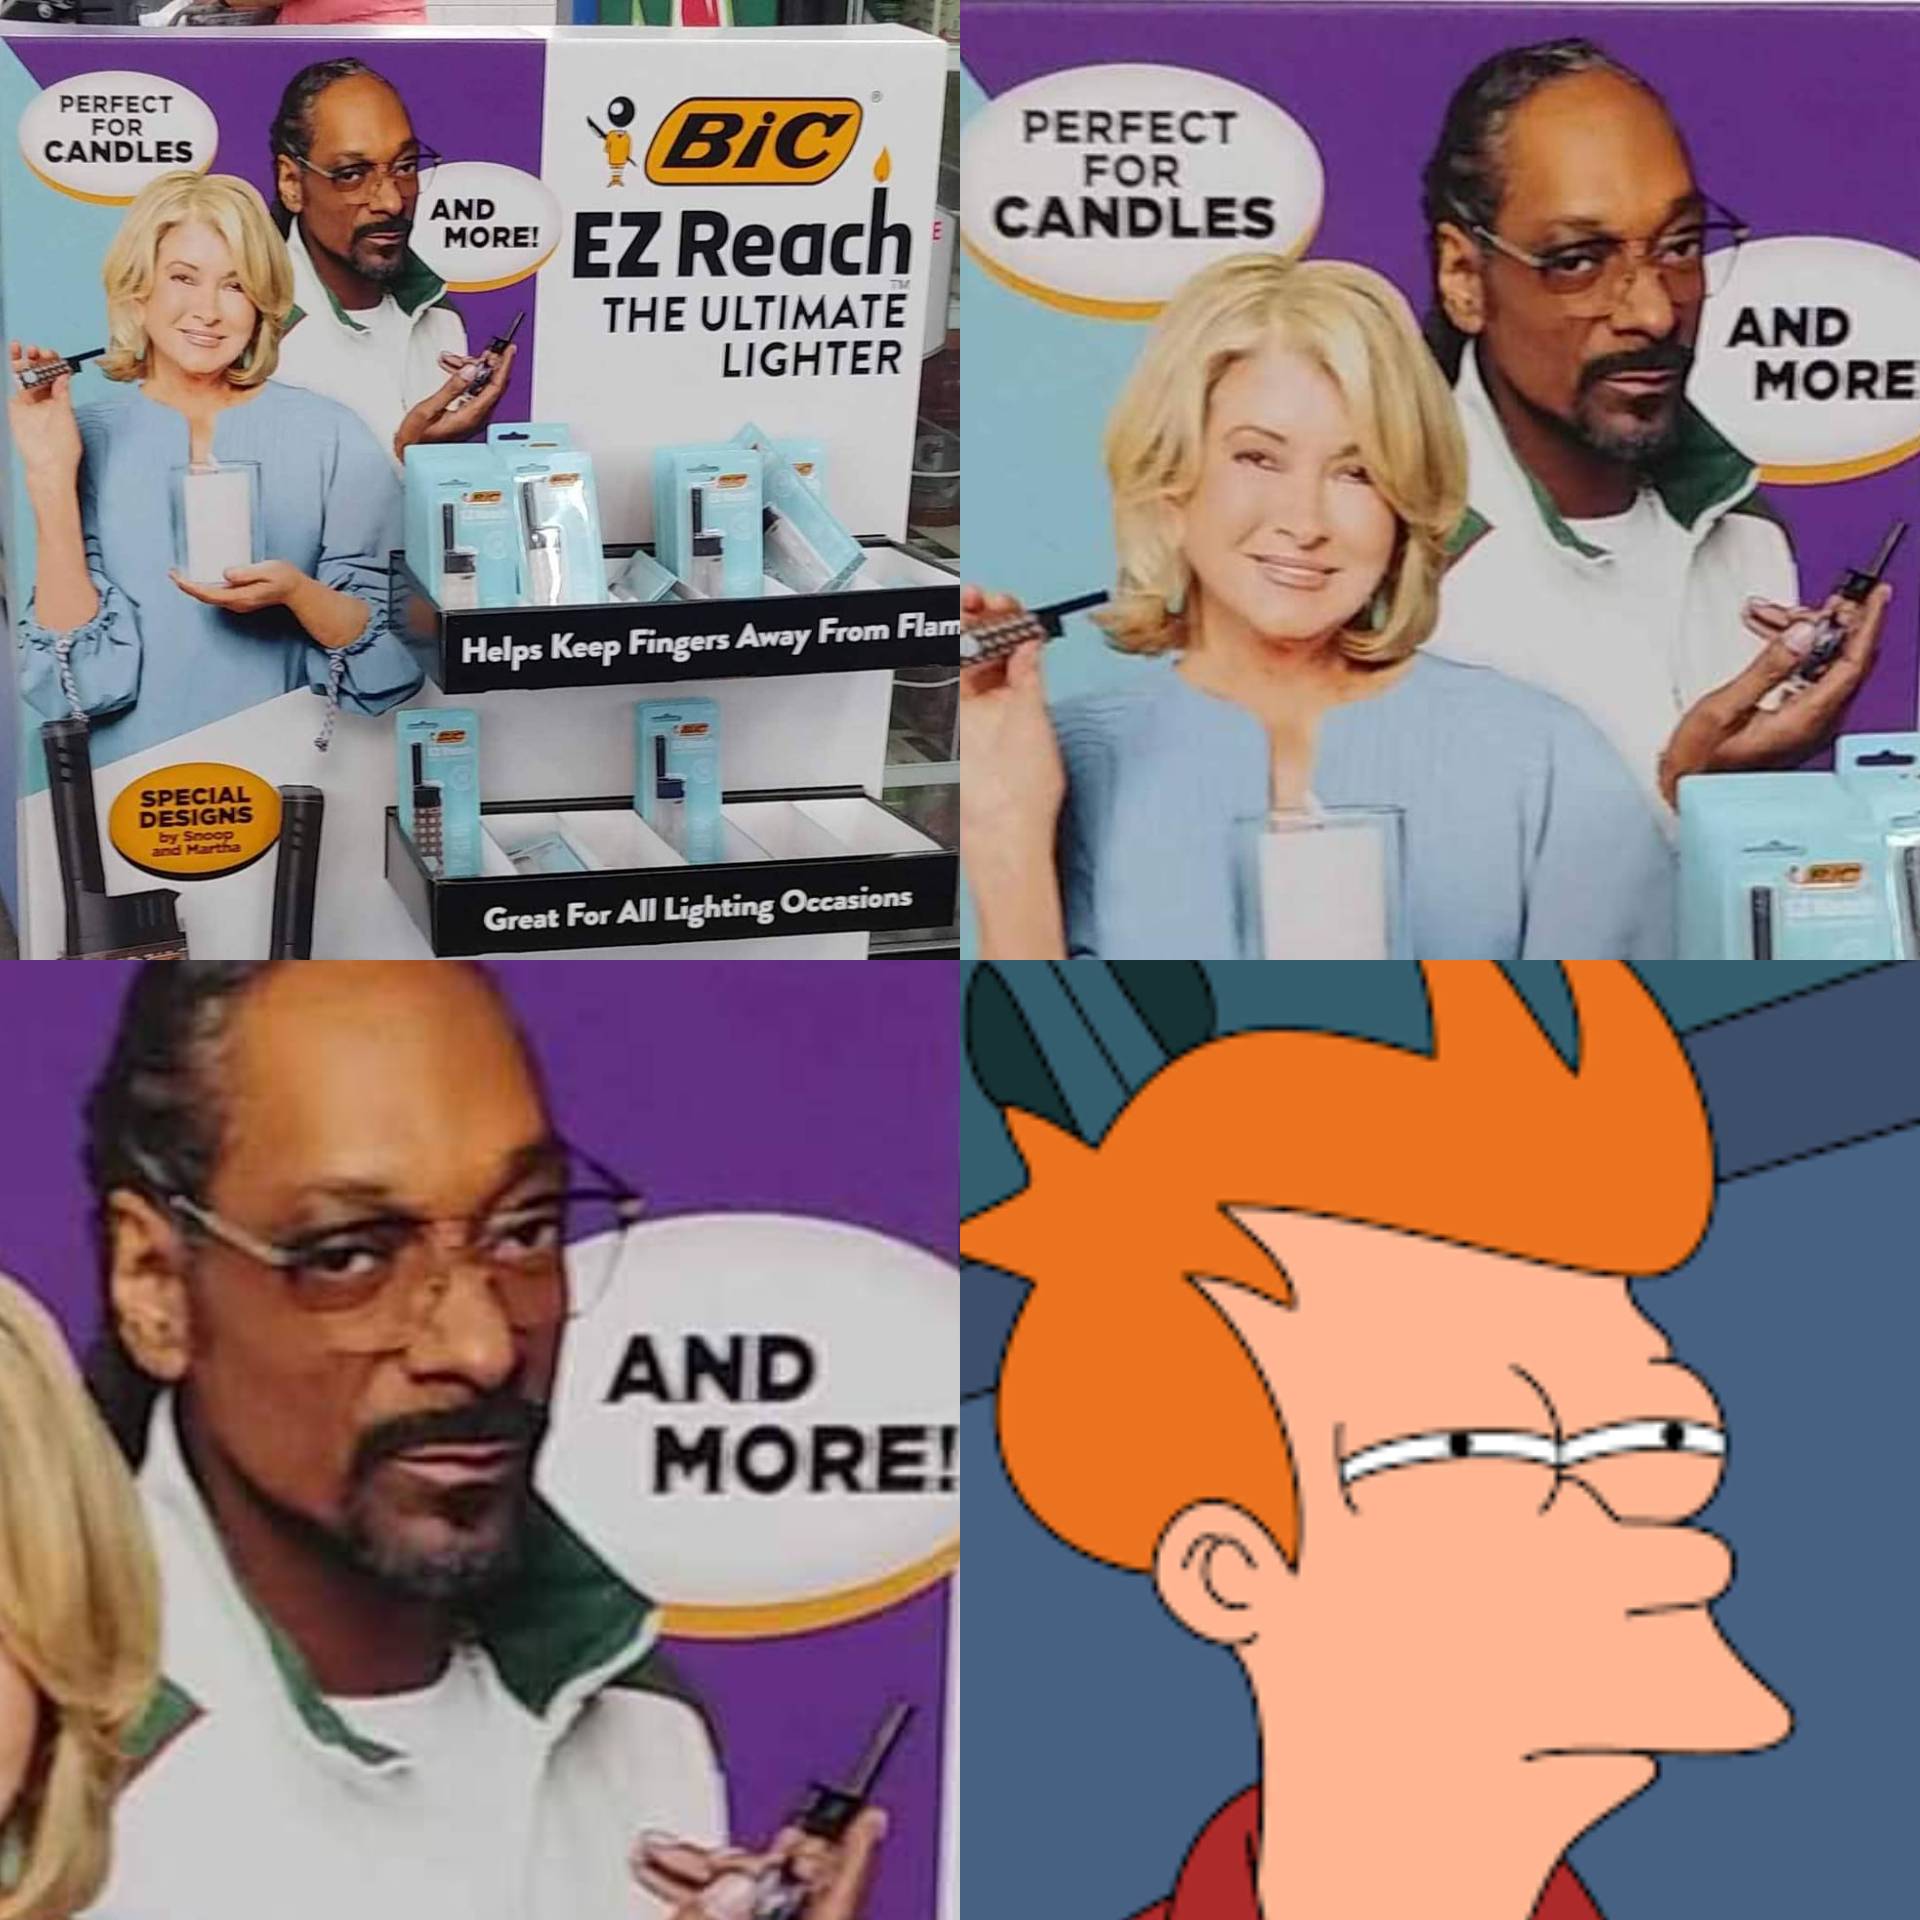 dank and savage memes - see what you did there - Perfect For Candles Special Designs by Snoop and Martha And More! Bic Perfect For Ez Reach Candles Tm The Ultimate Lighter Helps Keep Fingers Away From Flam Great For All Lighting Occasions And More! And Mo